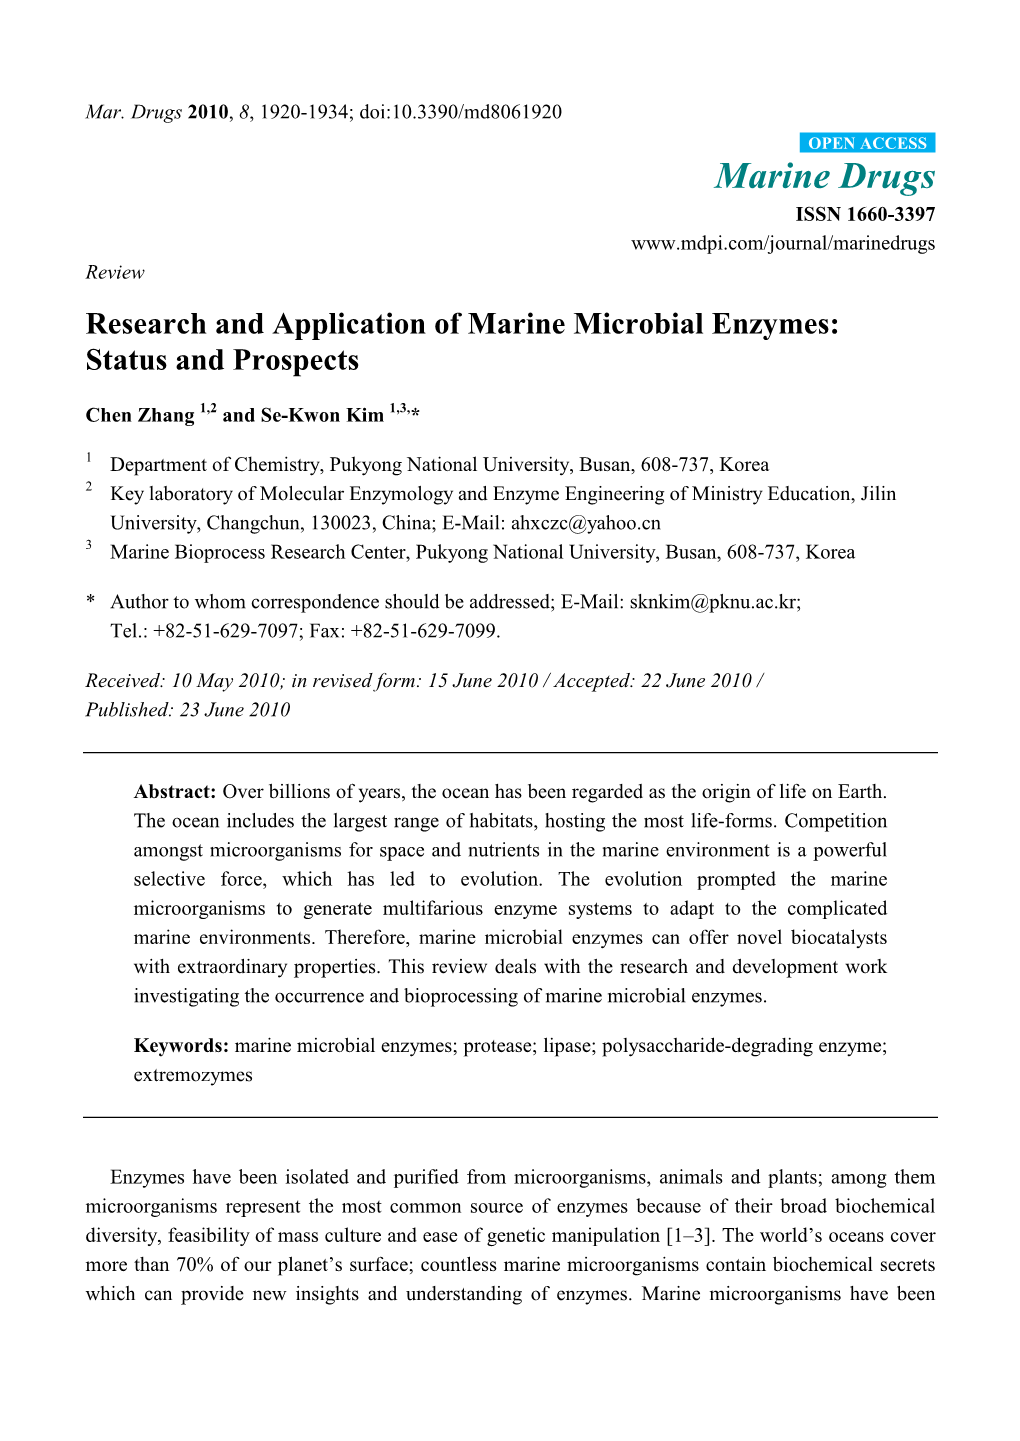 Research and Application of Marine Microbial Enzymes: Status and Prospects